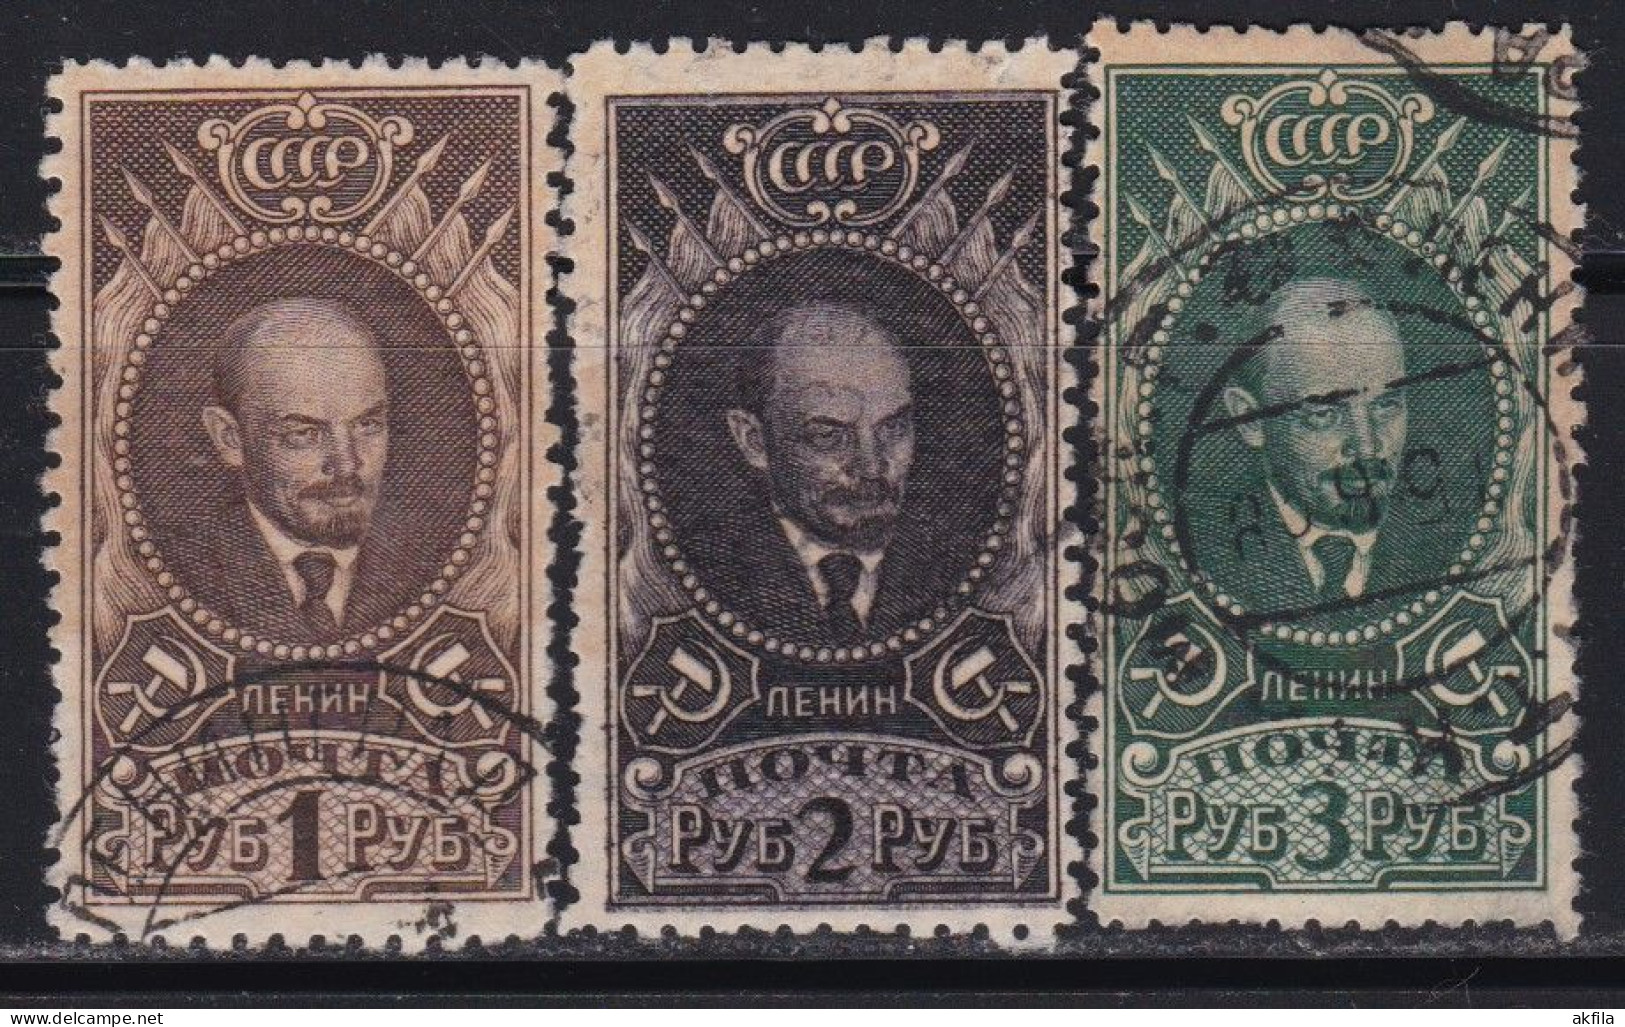 Russia USSR 1926 Lenin Used Miche 308/310 - Usados